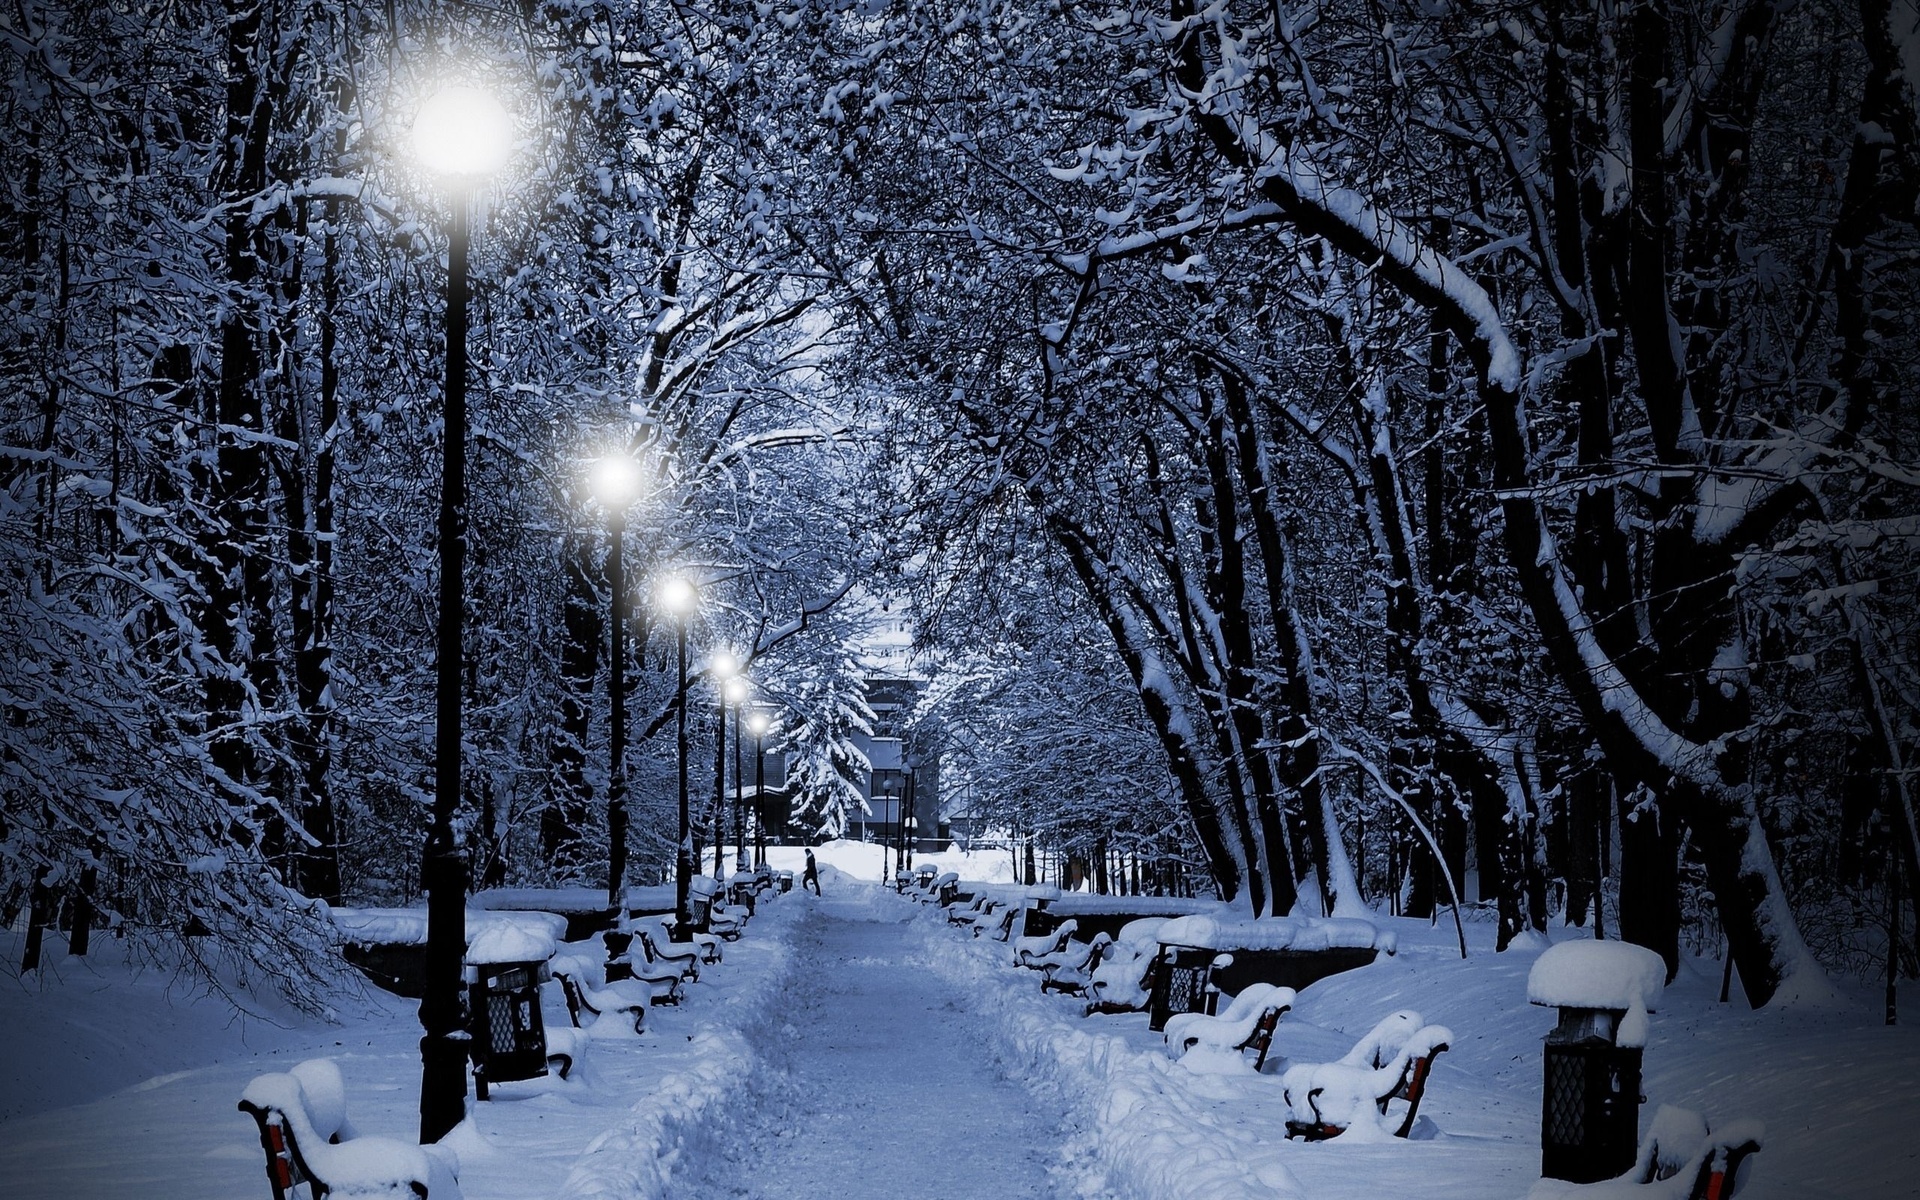 landscapes, Nature, Winter, Snow, Snowflakes, Snowing, Trees, Park, White, Night, Lights, Christmas Wallpaper